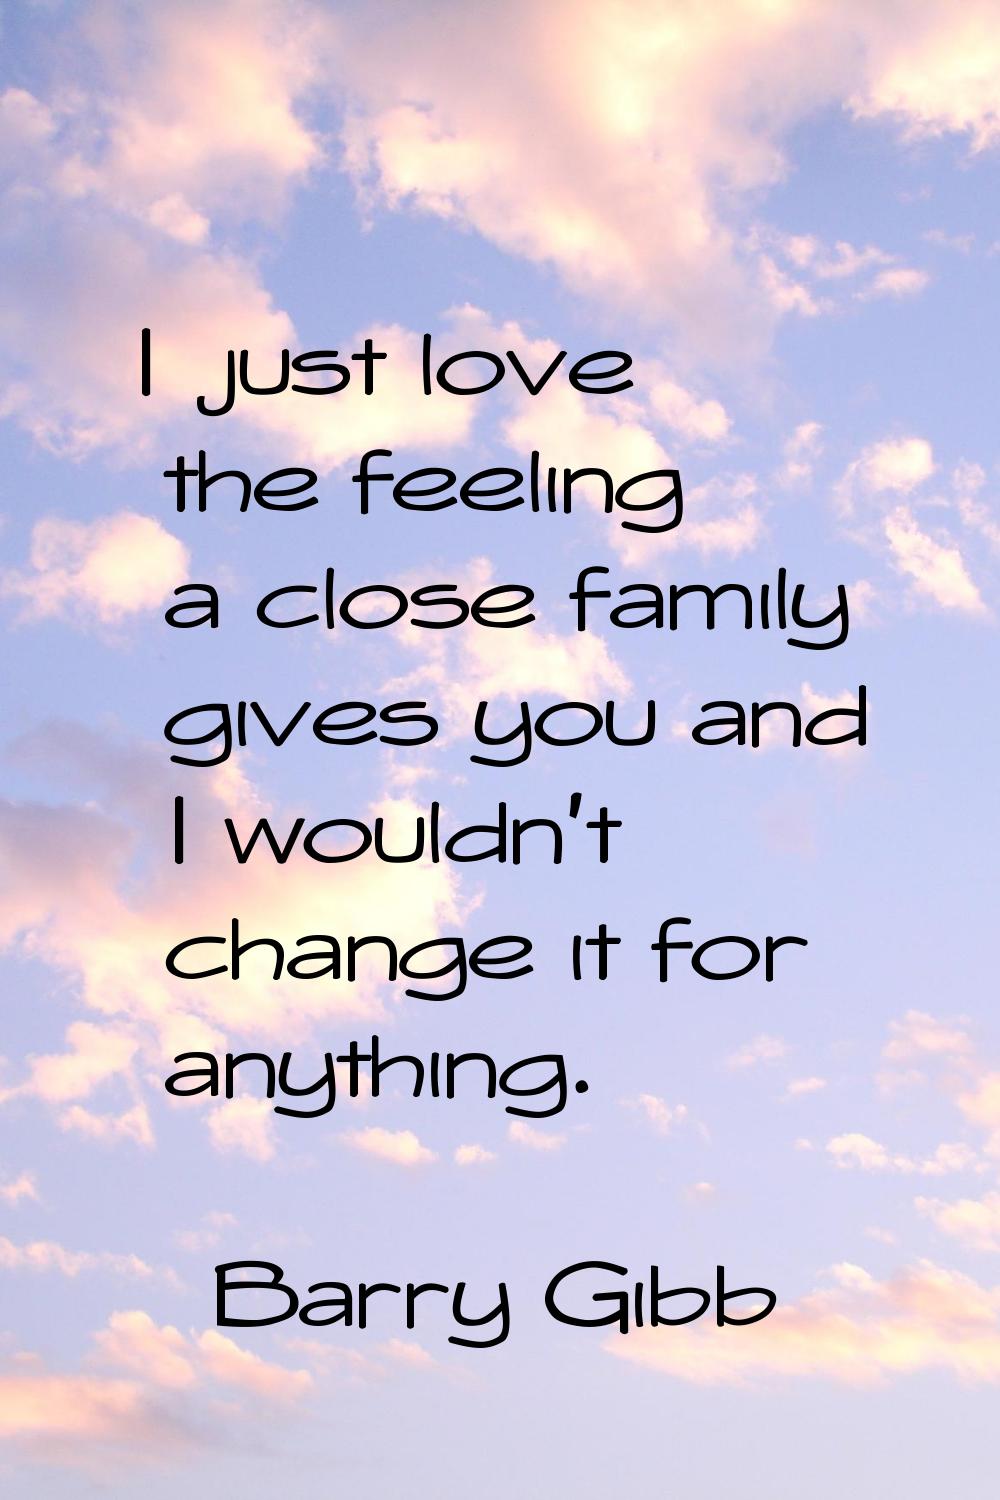 I just love the feeling a close family gives you and I wouldn't change it for anything.